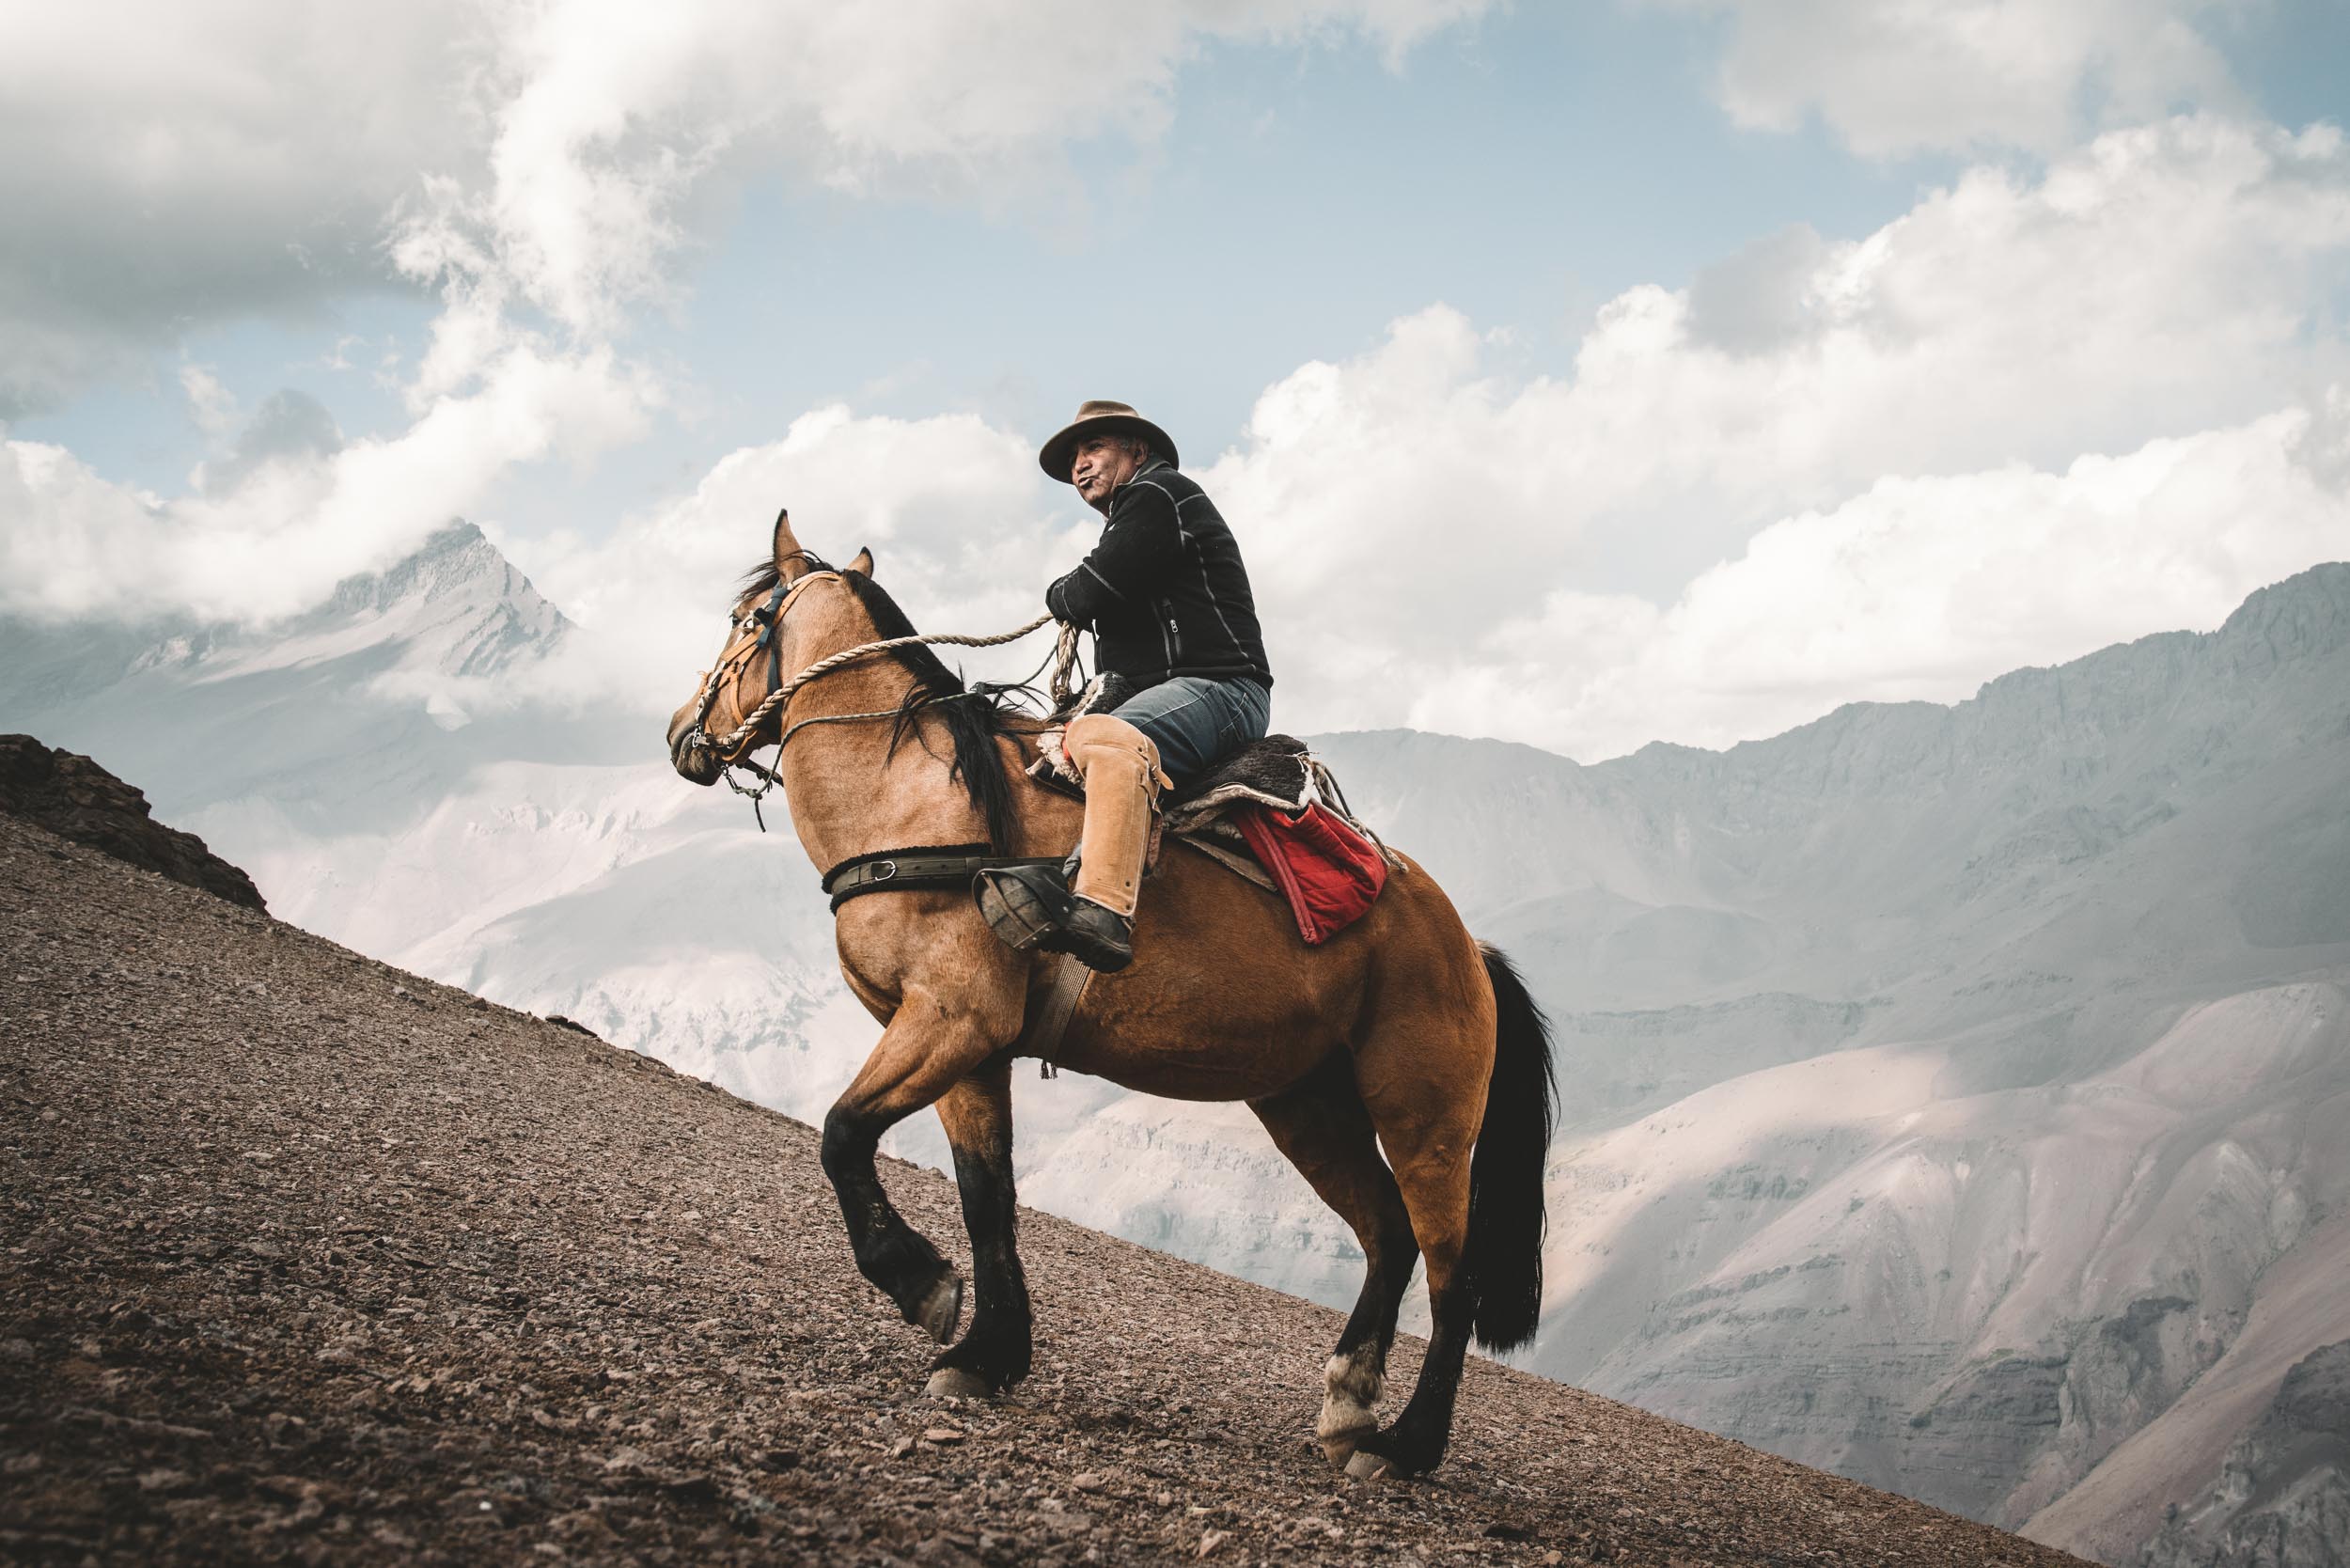 Old Chilean cowboy sheep herder on his horse in the Andes mountains.